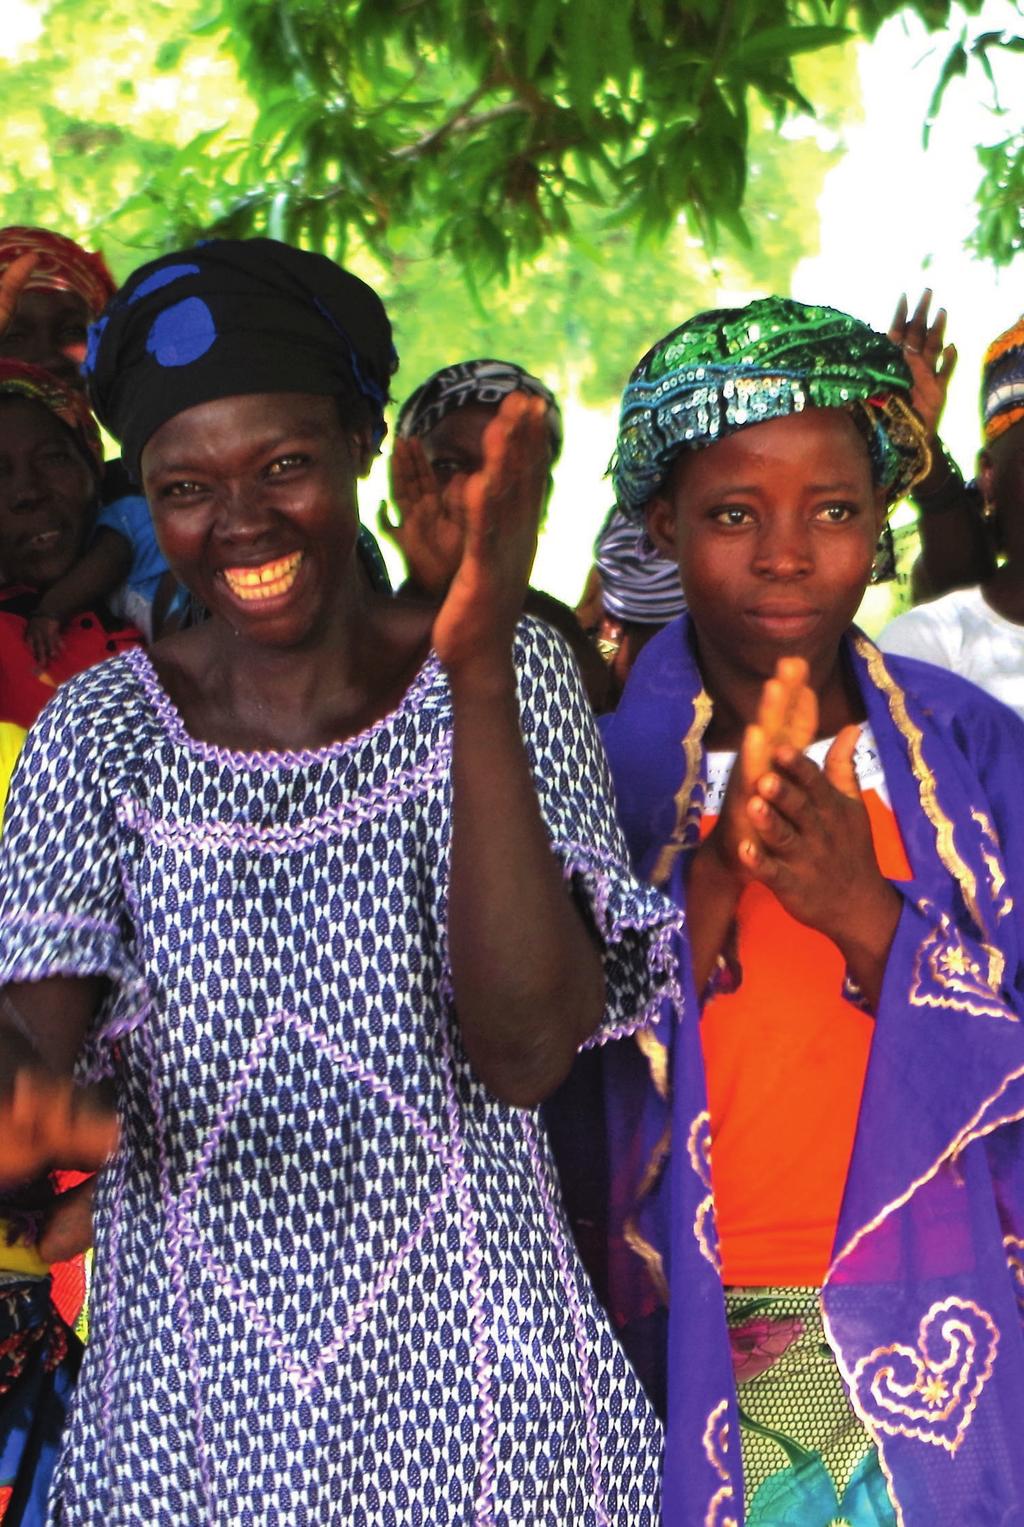 Since 2006, the L OCCITANE Foundation has promoted the economic emancipation of Burkinabe women by supporting education, microcredit and training programmes.